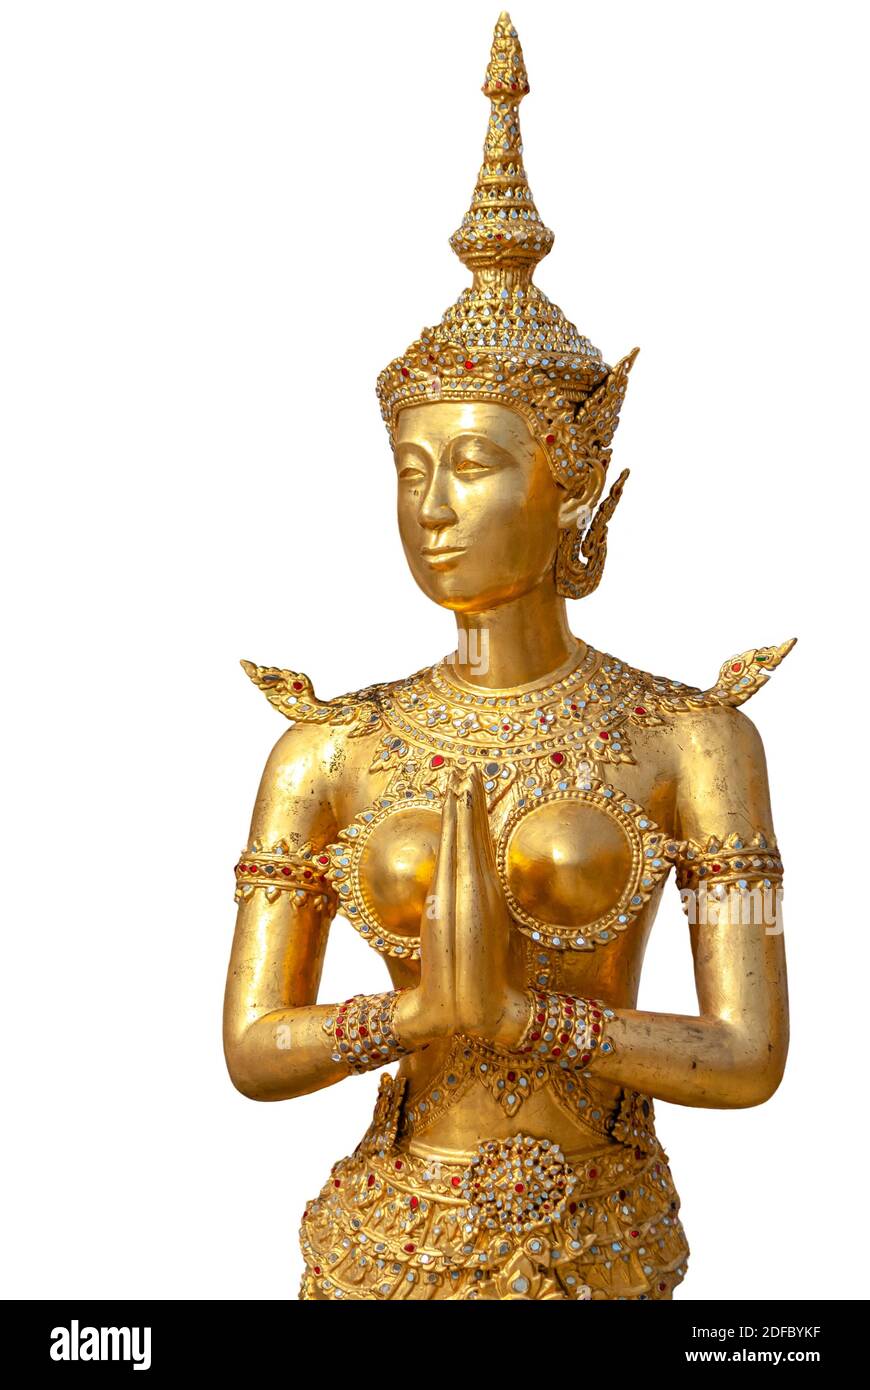 Golden Thai Kinnaree Sculpture, half human half bird,at the Grand Palace, Thailand, cut out on white background Stock Photo